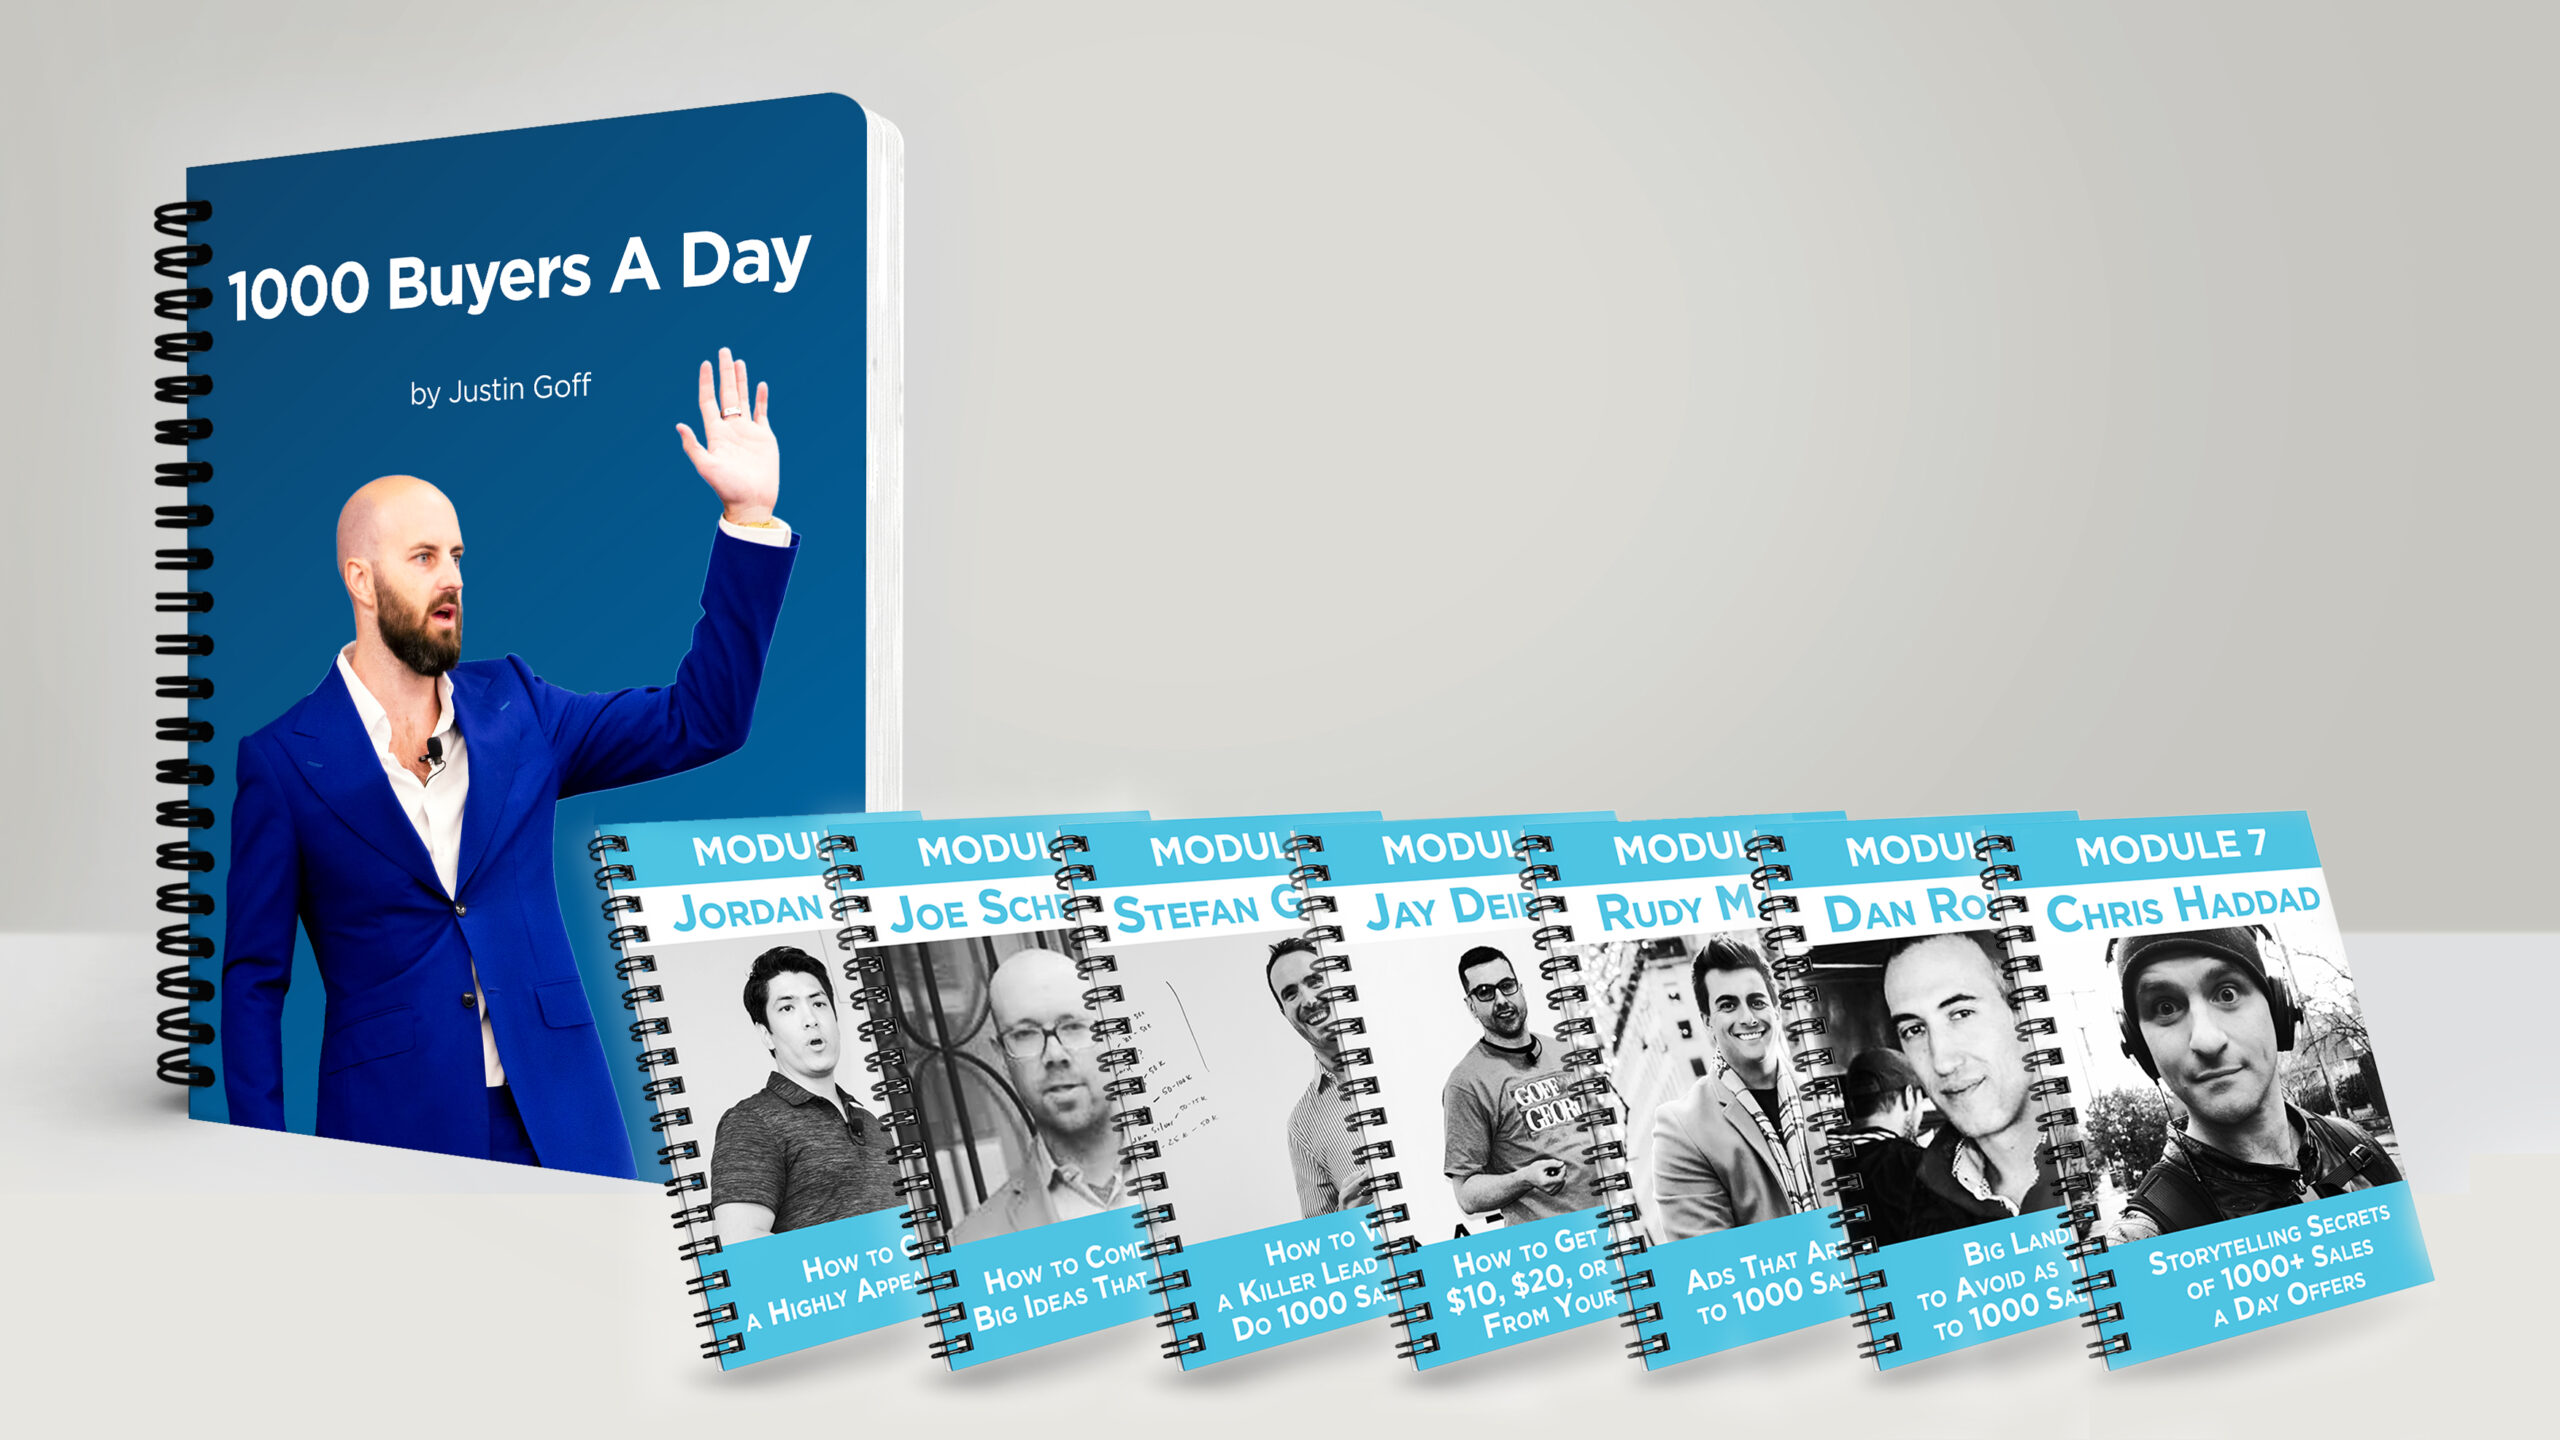 Justin Goff – Marketing Letter – 1000 Buyers a Day